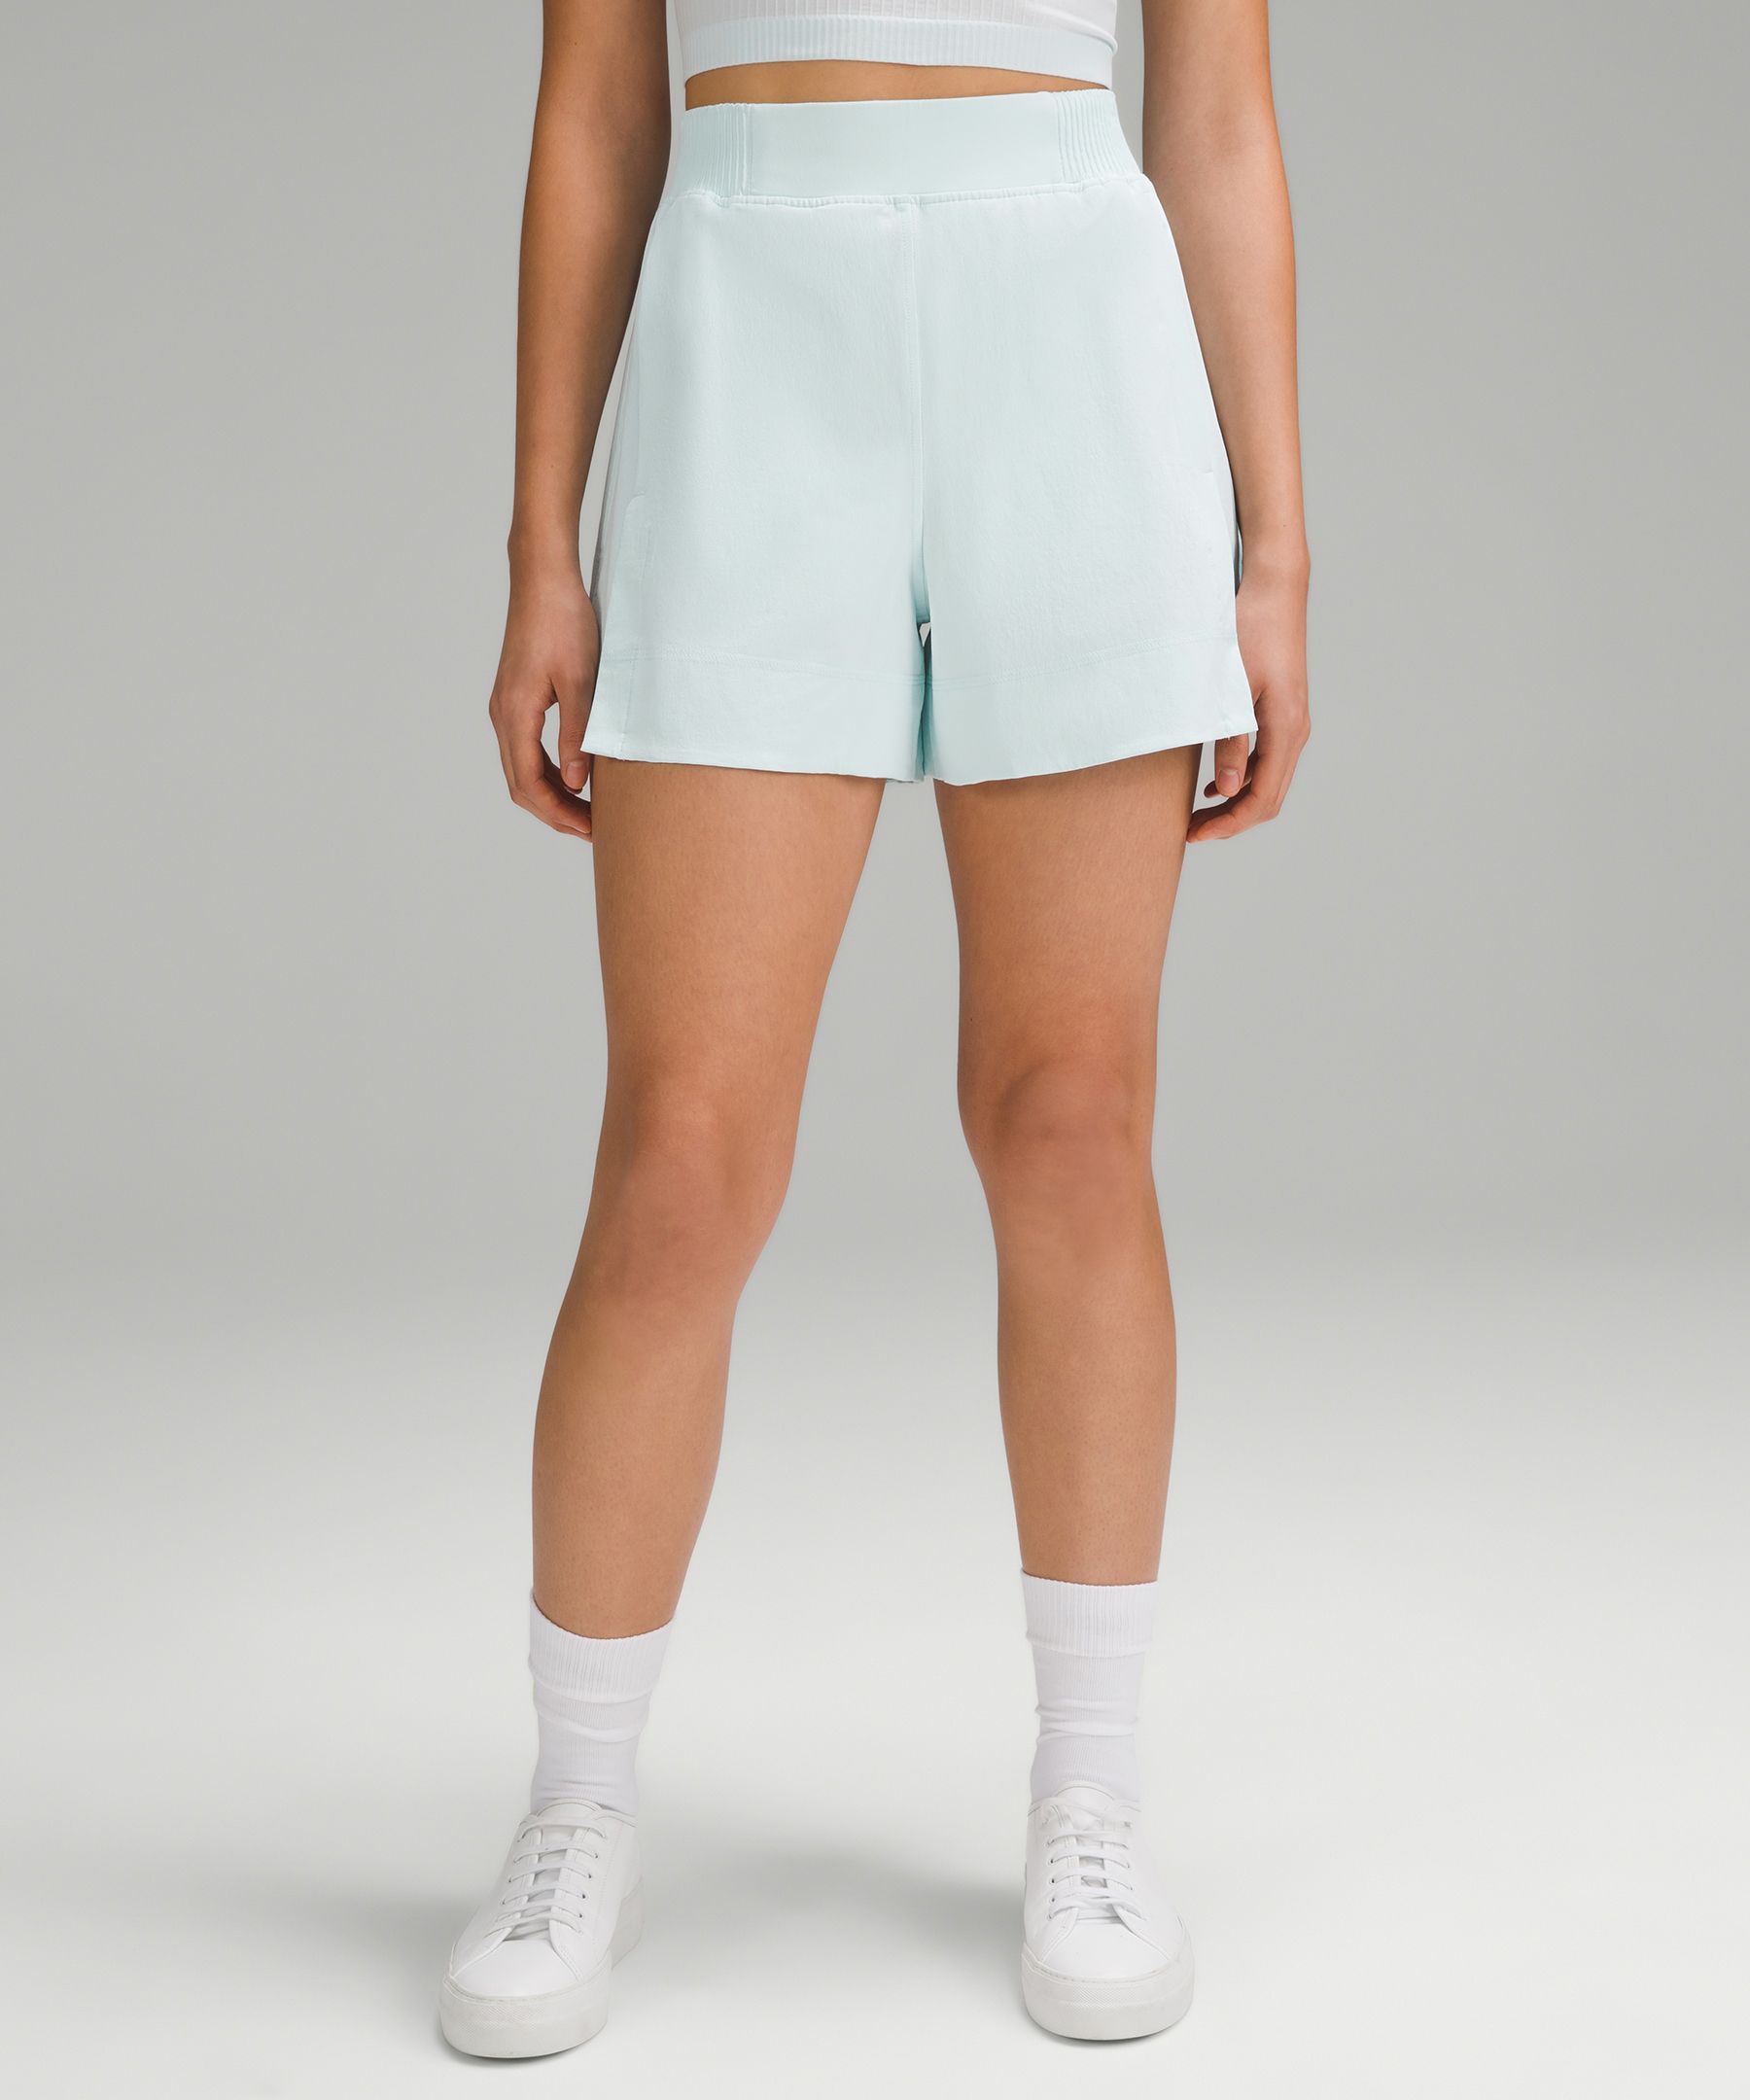 Stretch Woven Relaxed-Fit High-Rise Short 4, Women's Shorts